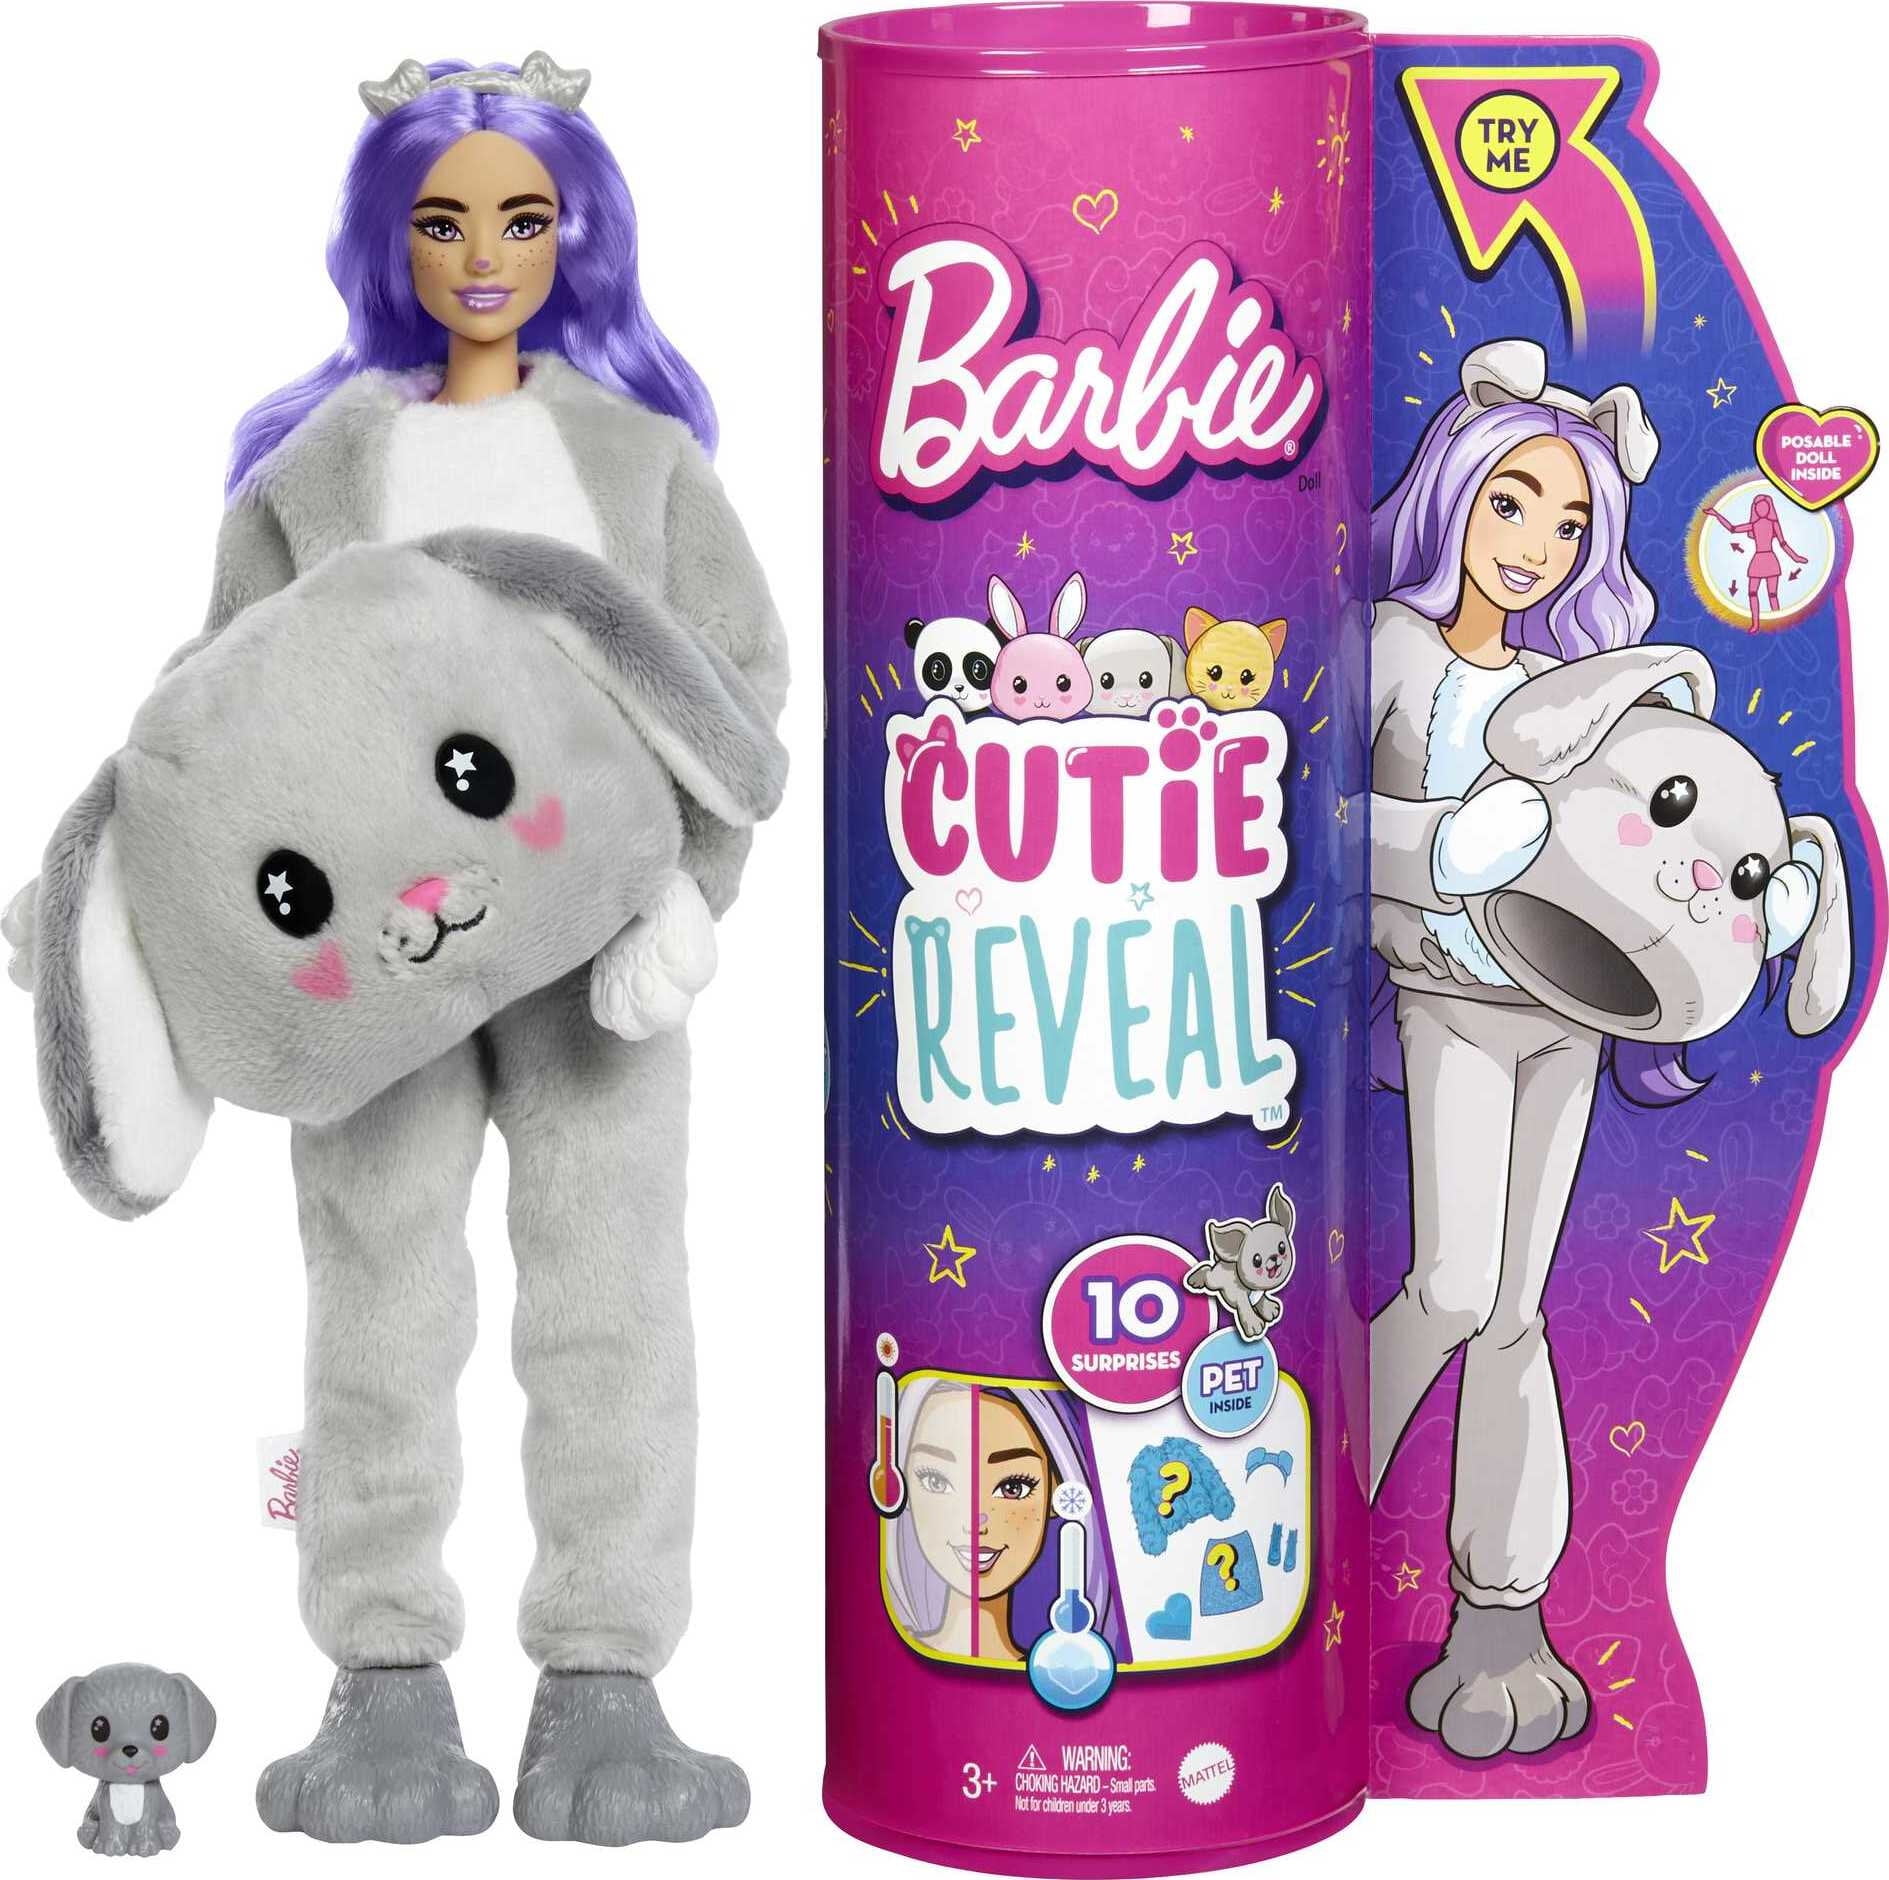 Barbie Doll Cutie Reveal Puppy Plush Costume Doll with Pet, Color Change -  